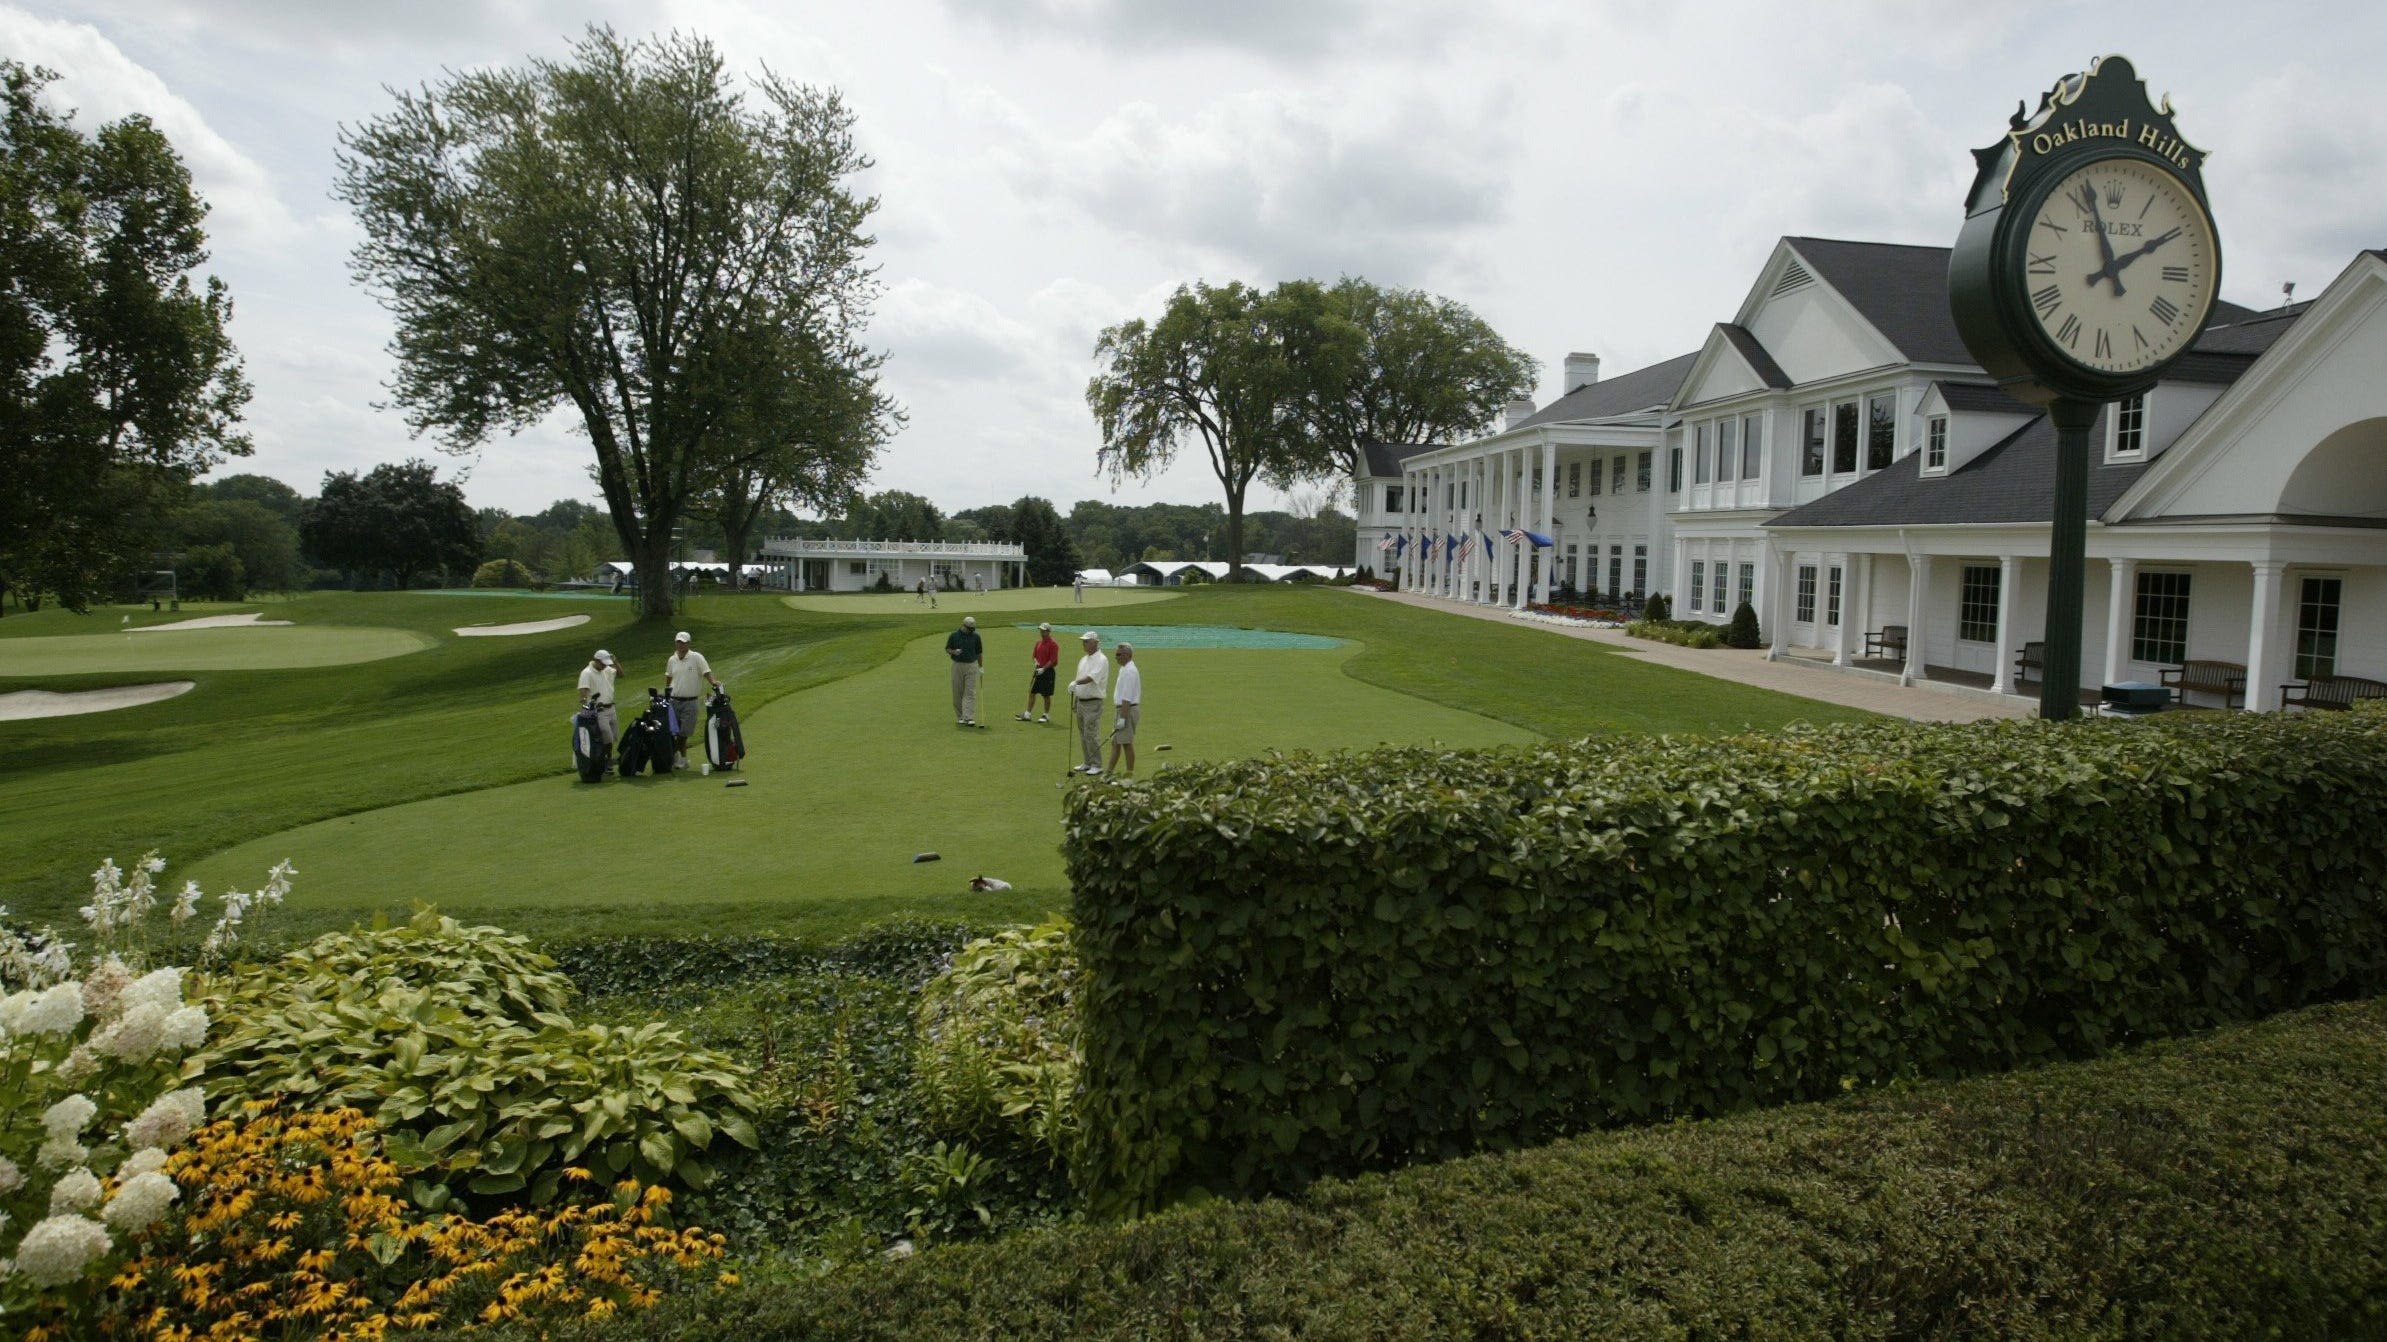 Oakland Hills Country Club through the years